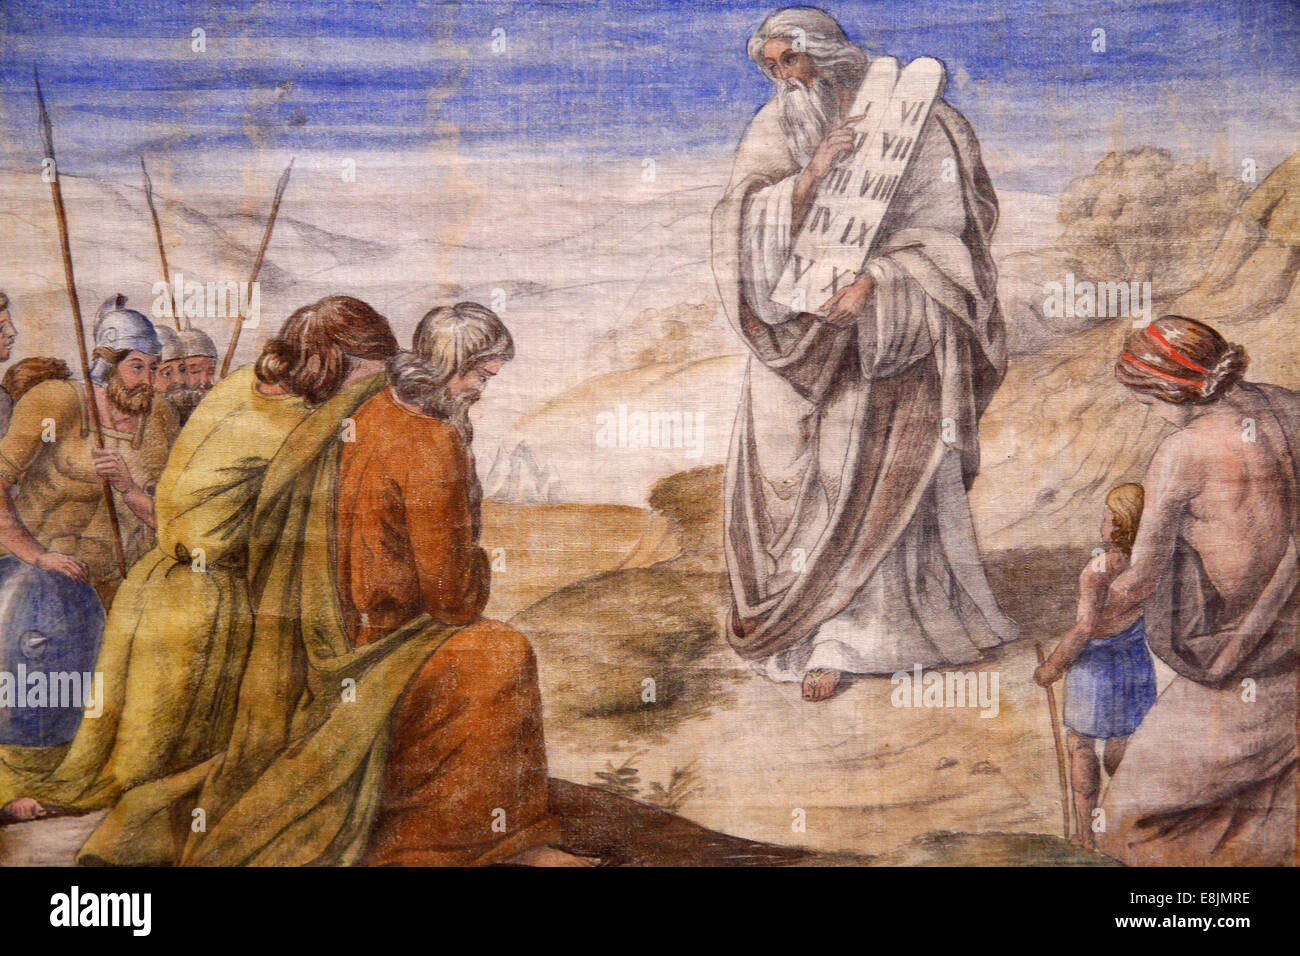 The Israel Museum. Moses and the ten commandments. Stock Photo